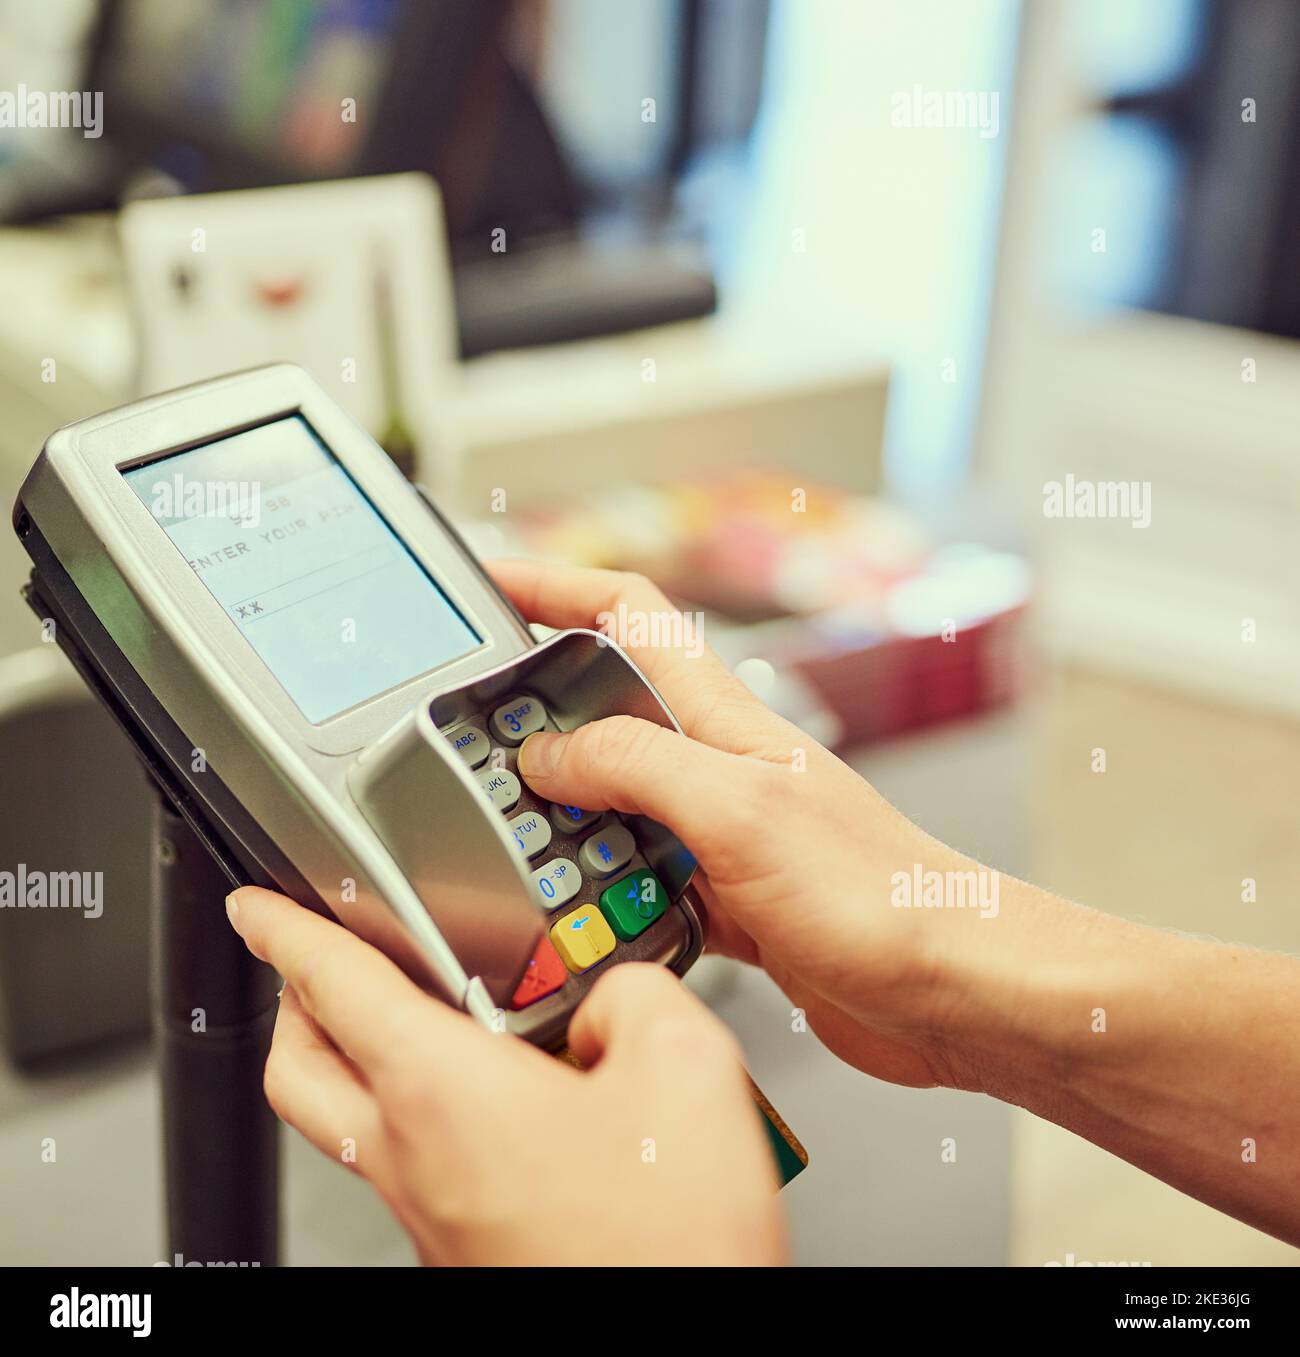 Enter your pin to complete your payment. Closeup shot of a person typing their pin number into a credit card machine at a grocery store. Stock Photo